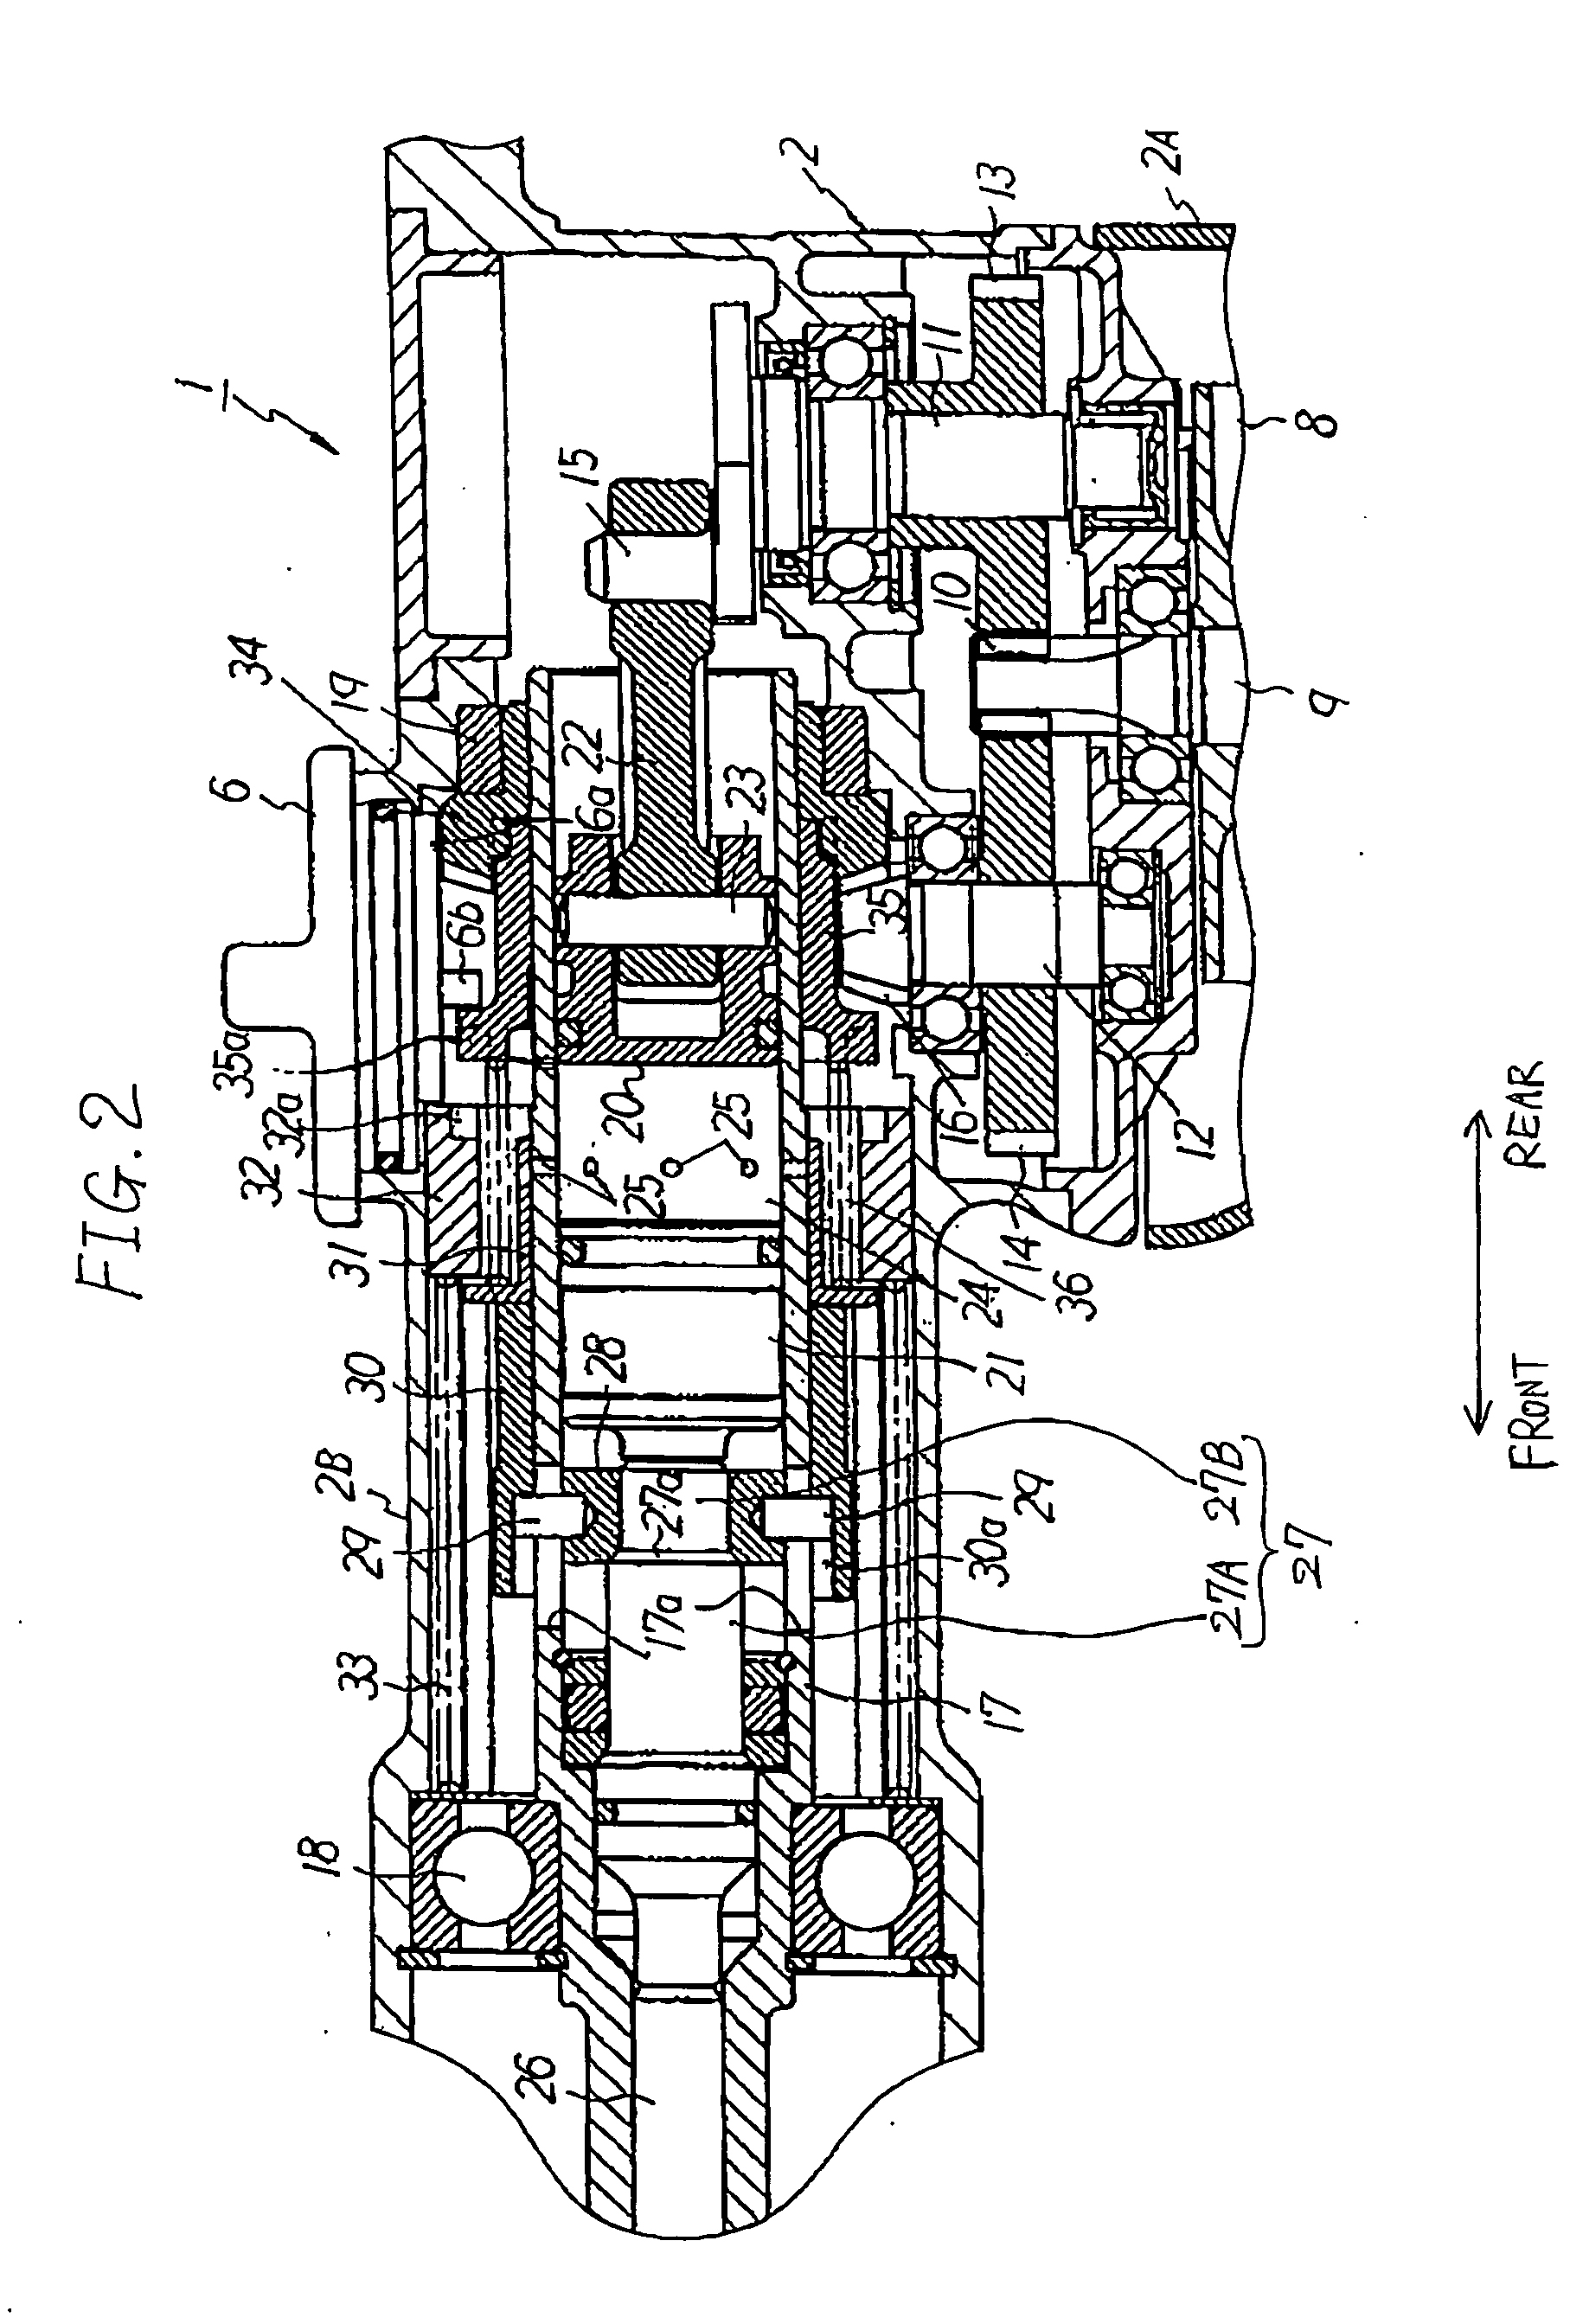 Hammer drill having switching mechanism for switching operation modes